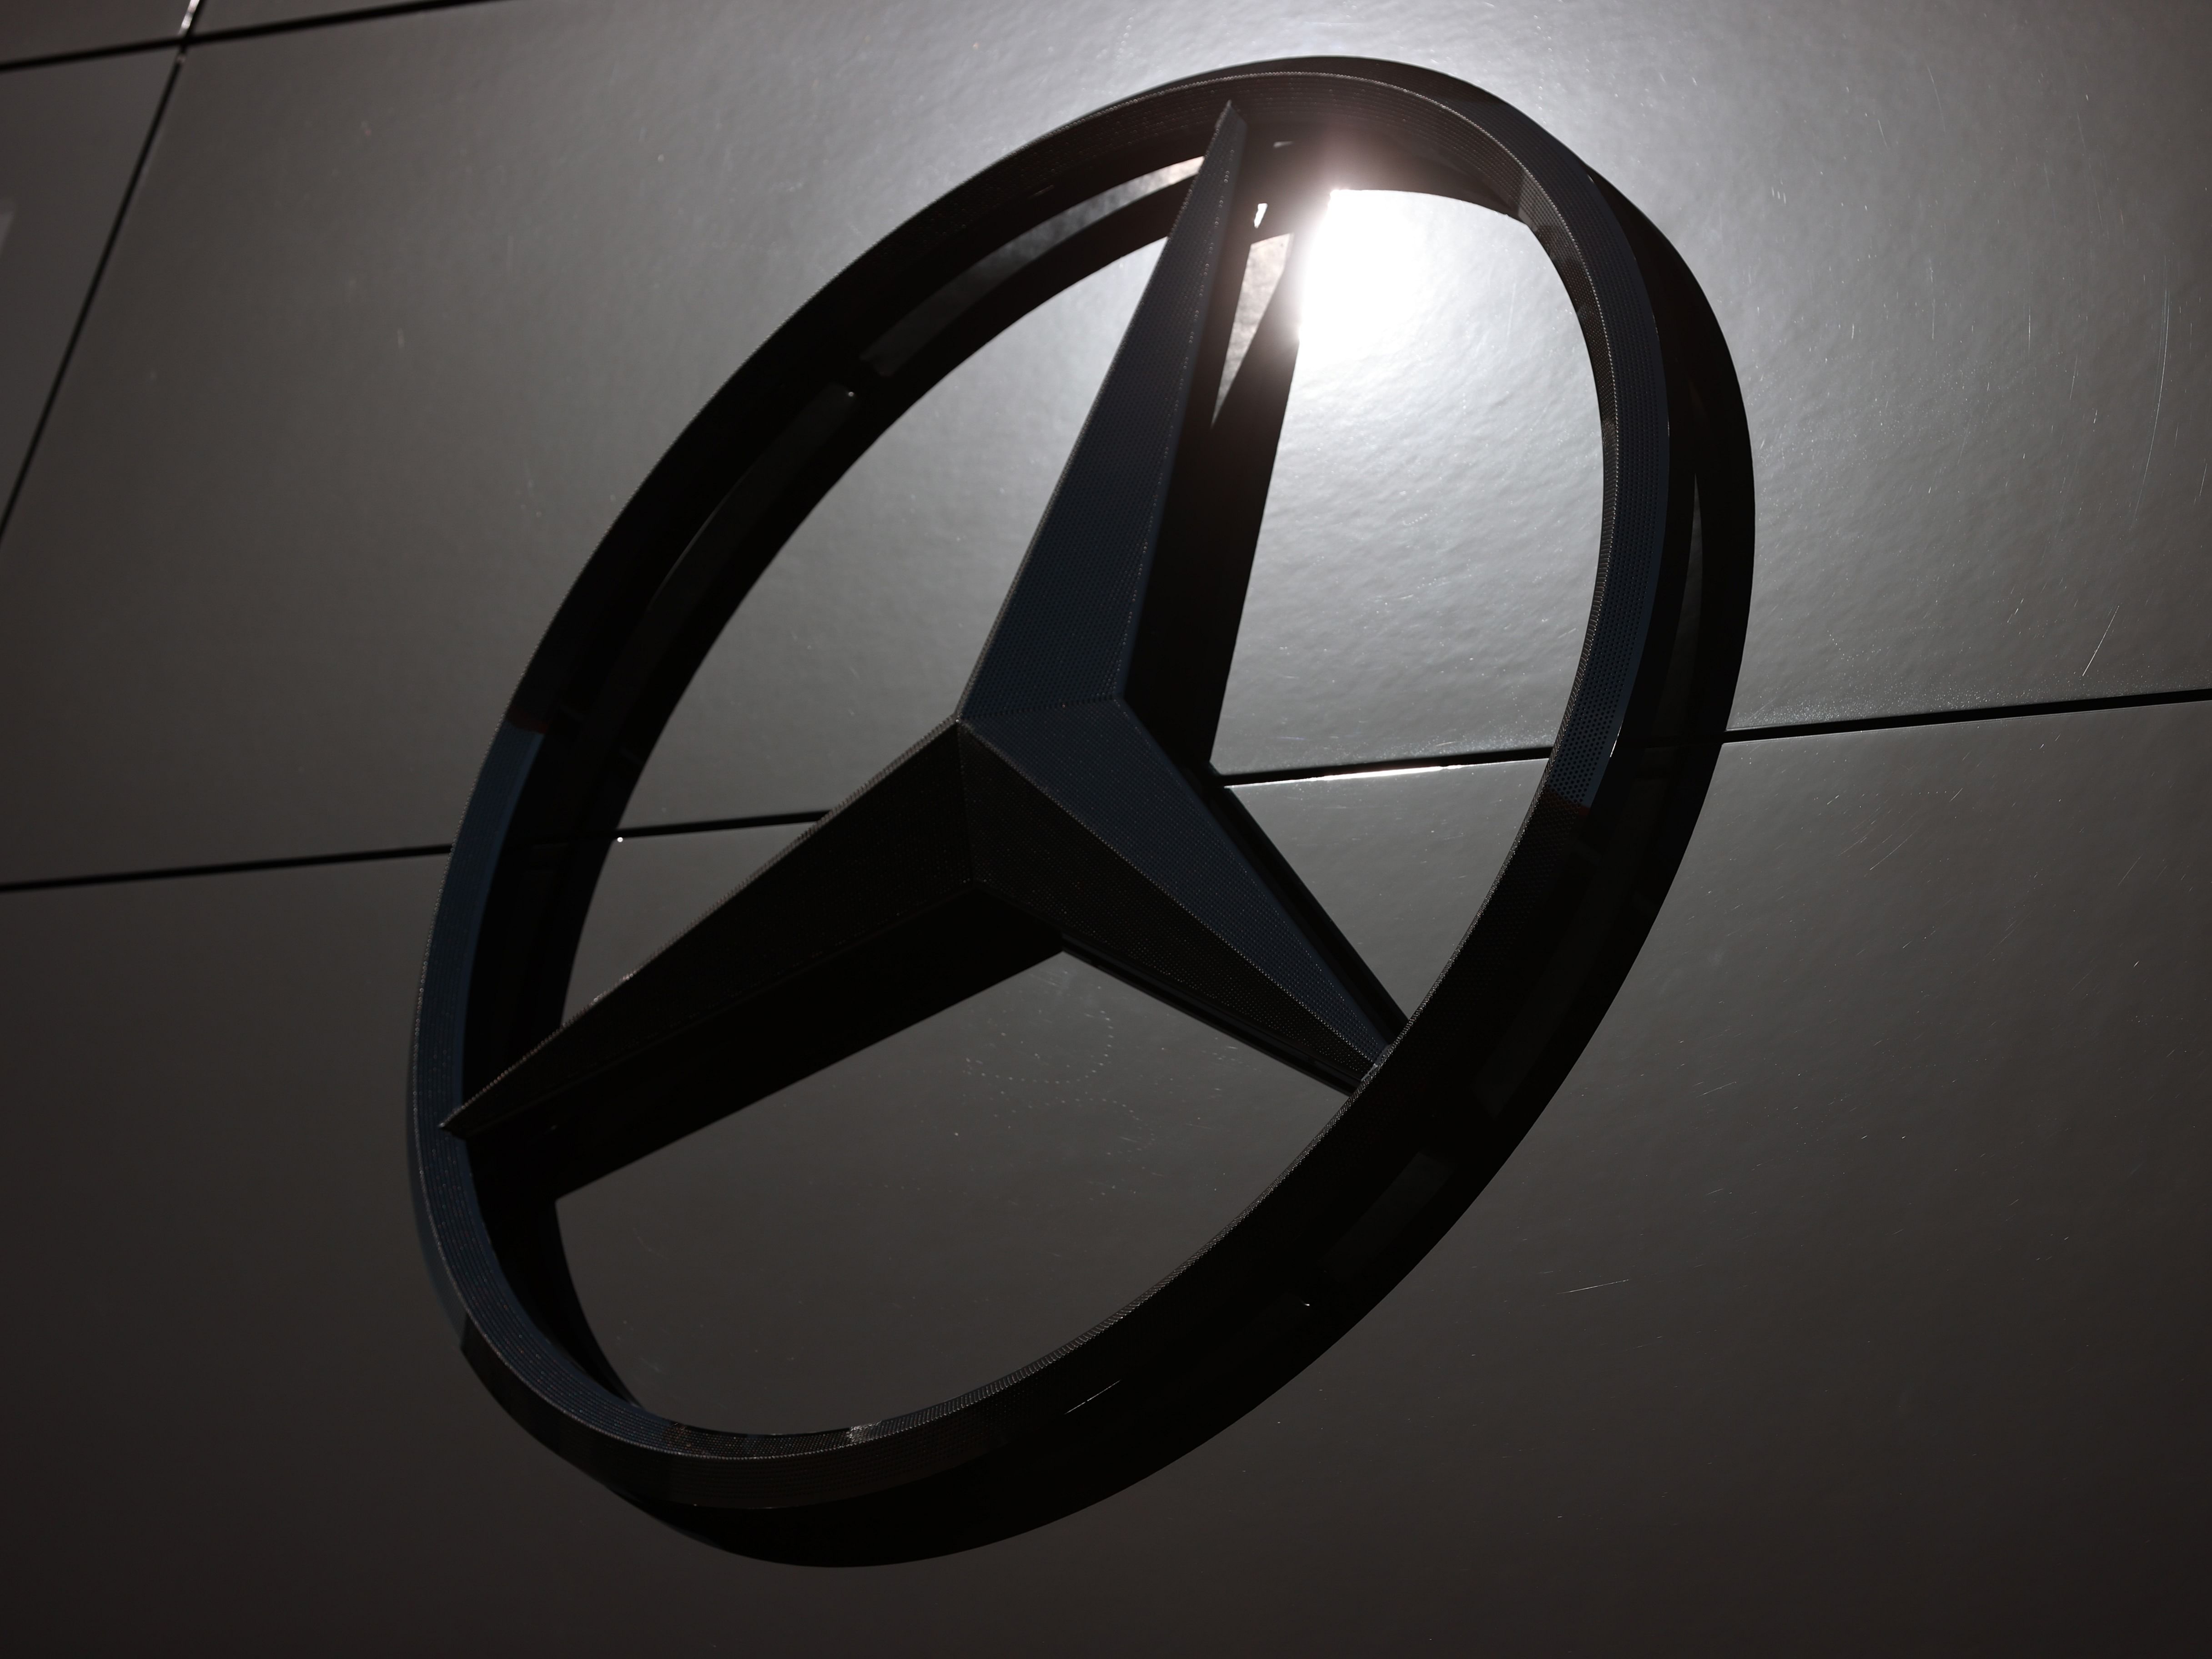 A general view of a Mercedes logo in the paddock prior to practice ahead of the 2021 F1 French Grand Prix. (Photo by Mark Thompson/Getty Images)